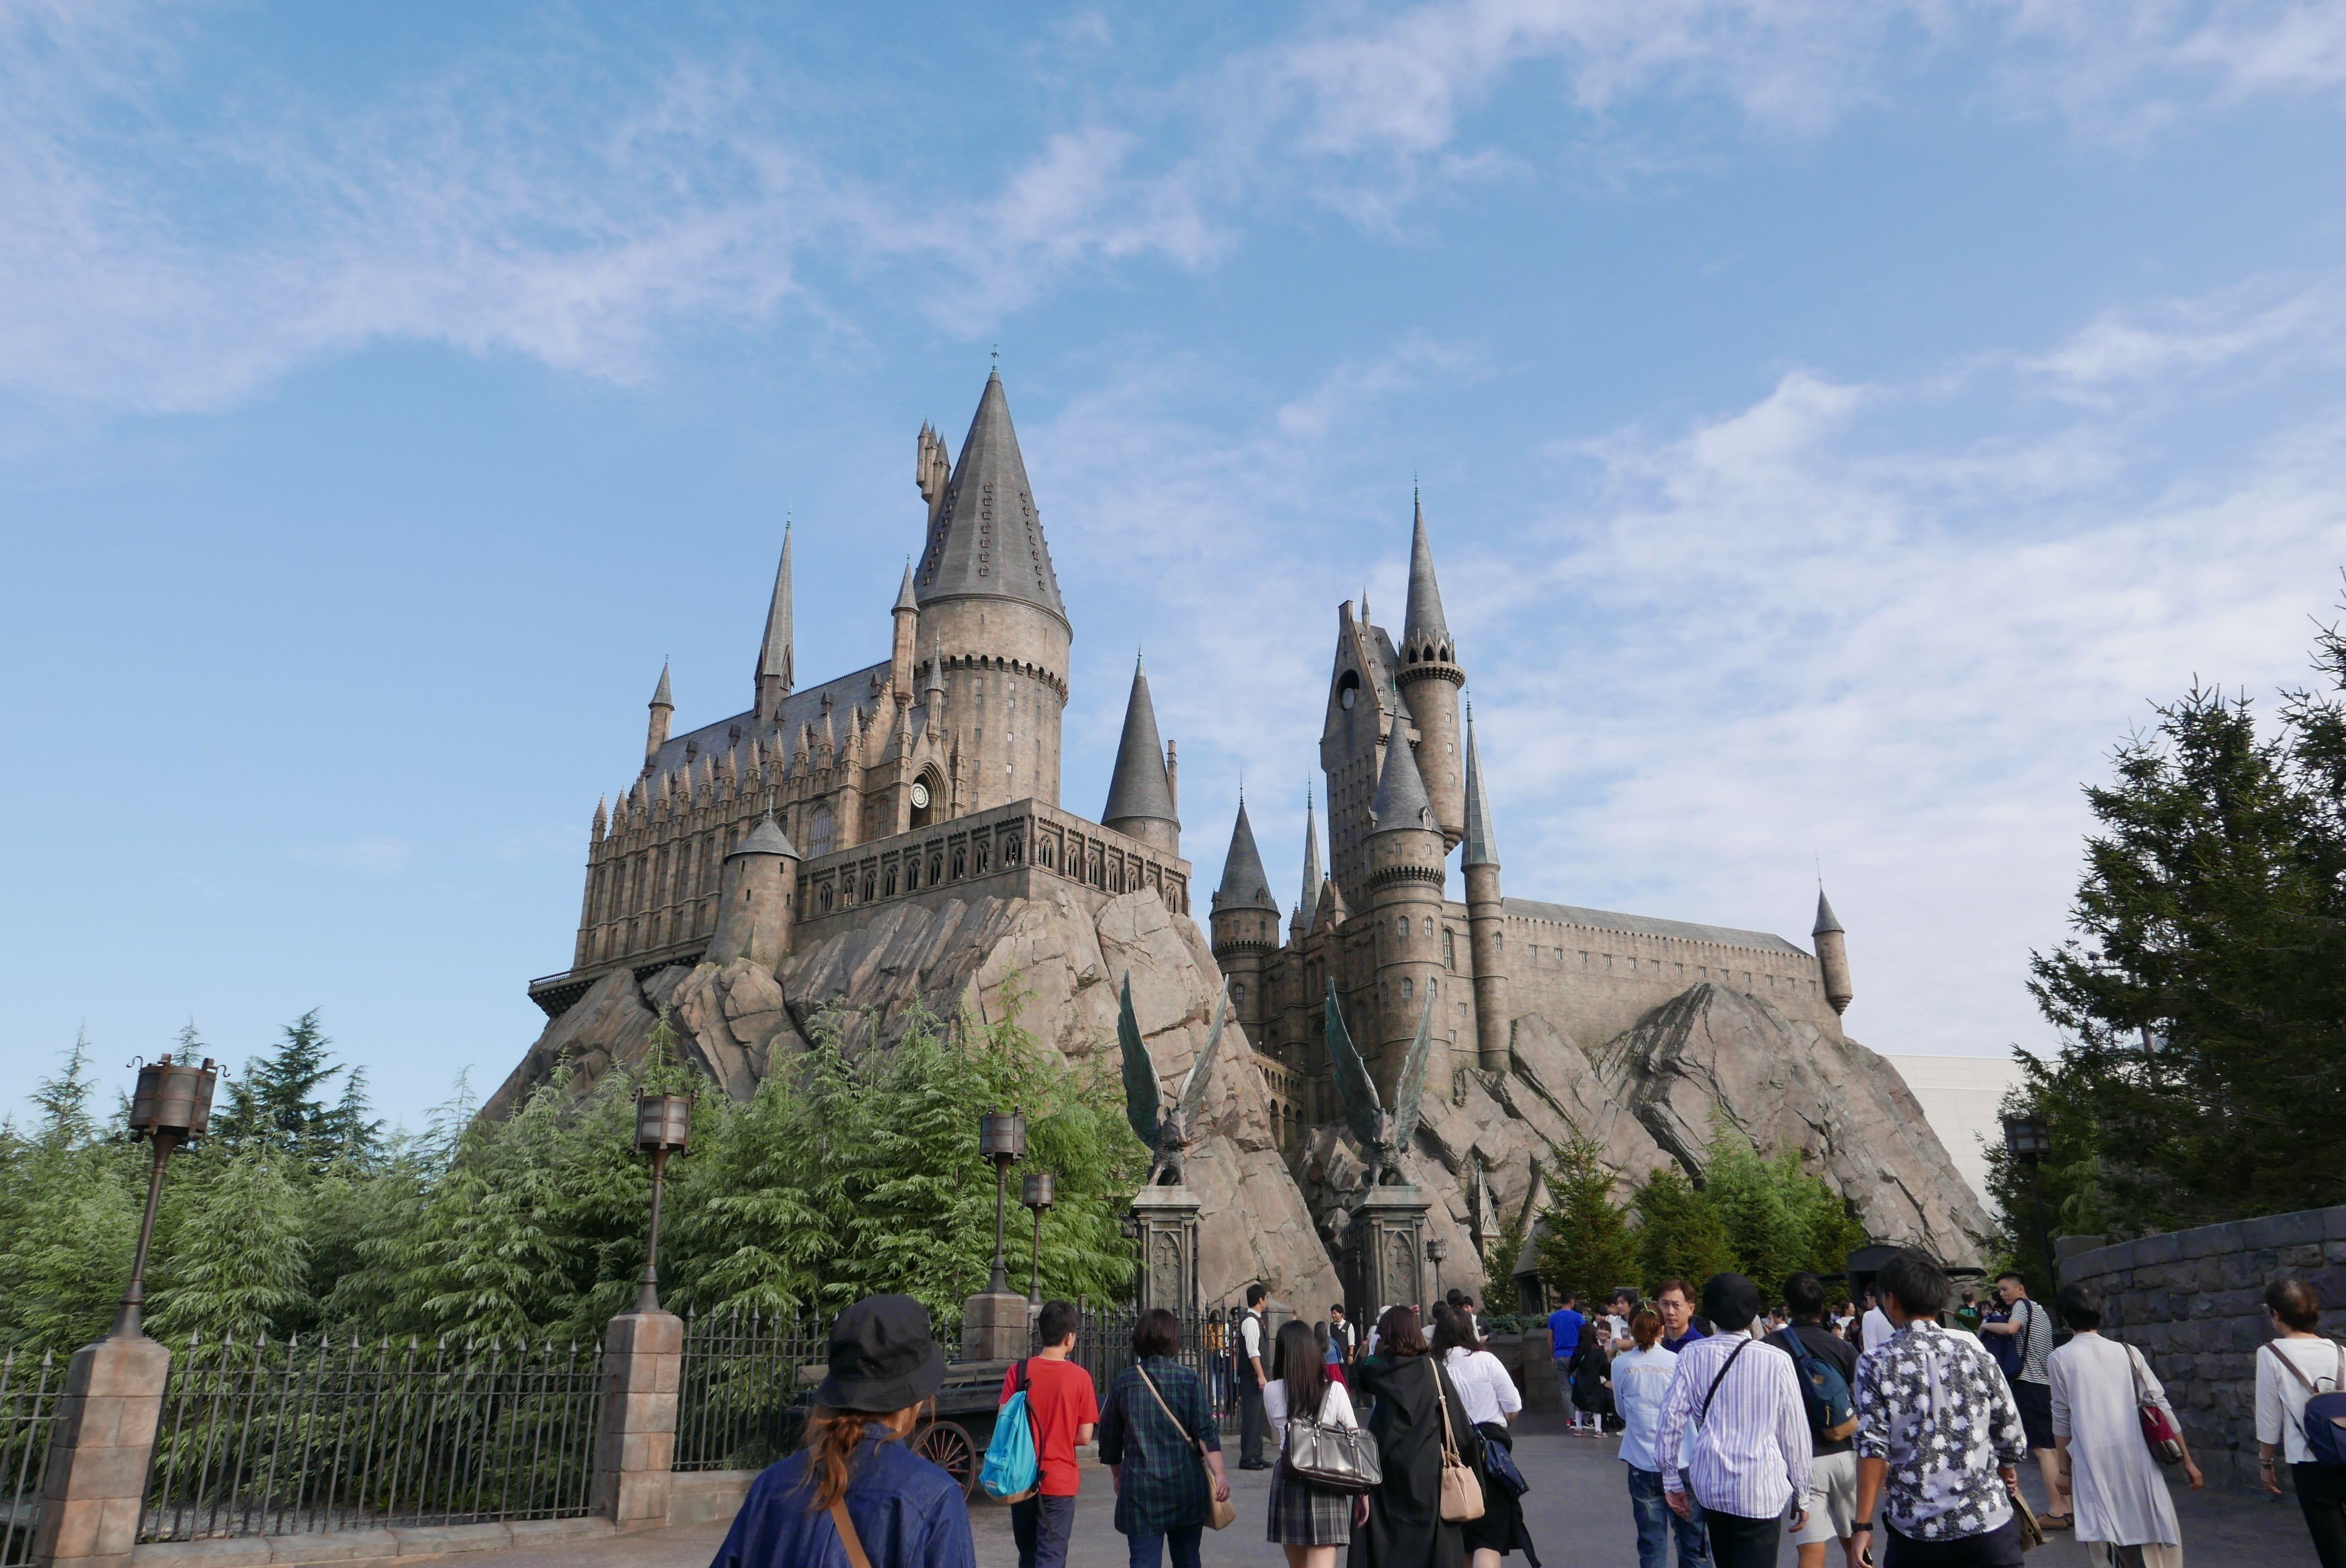 How To Magically Cut Short The Queue At Harry Potter World At Universal Studios Japan